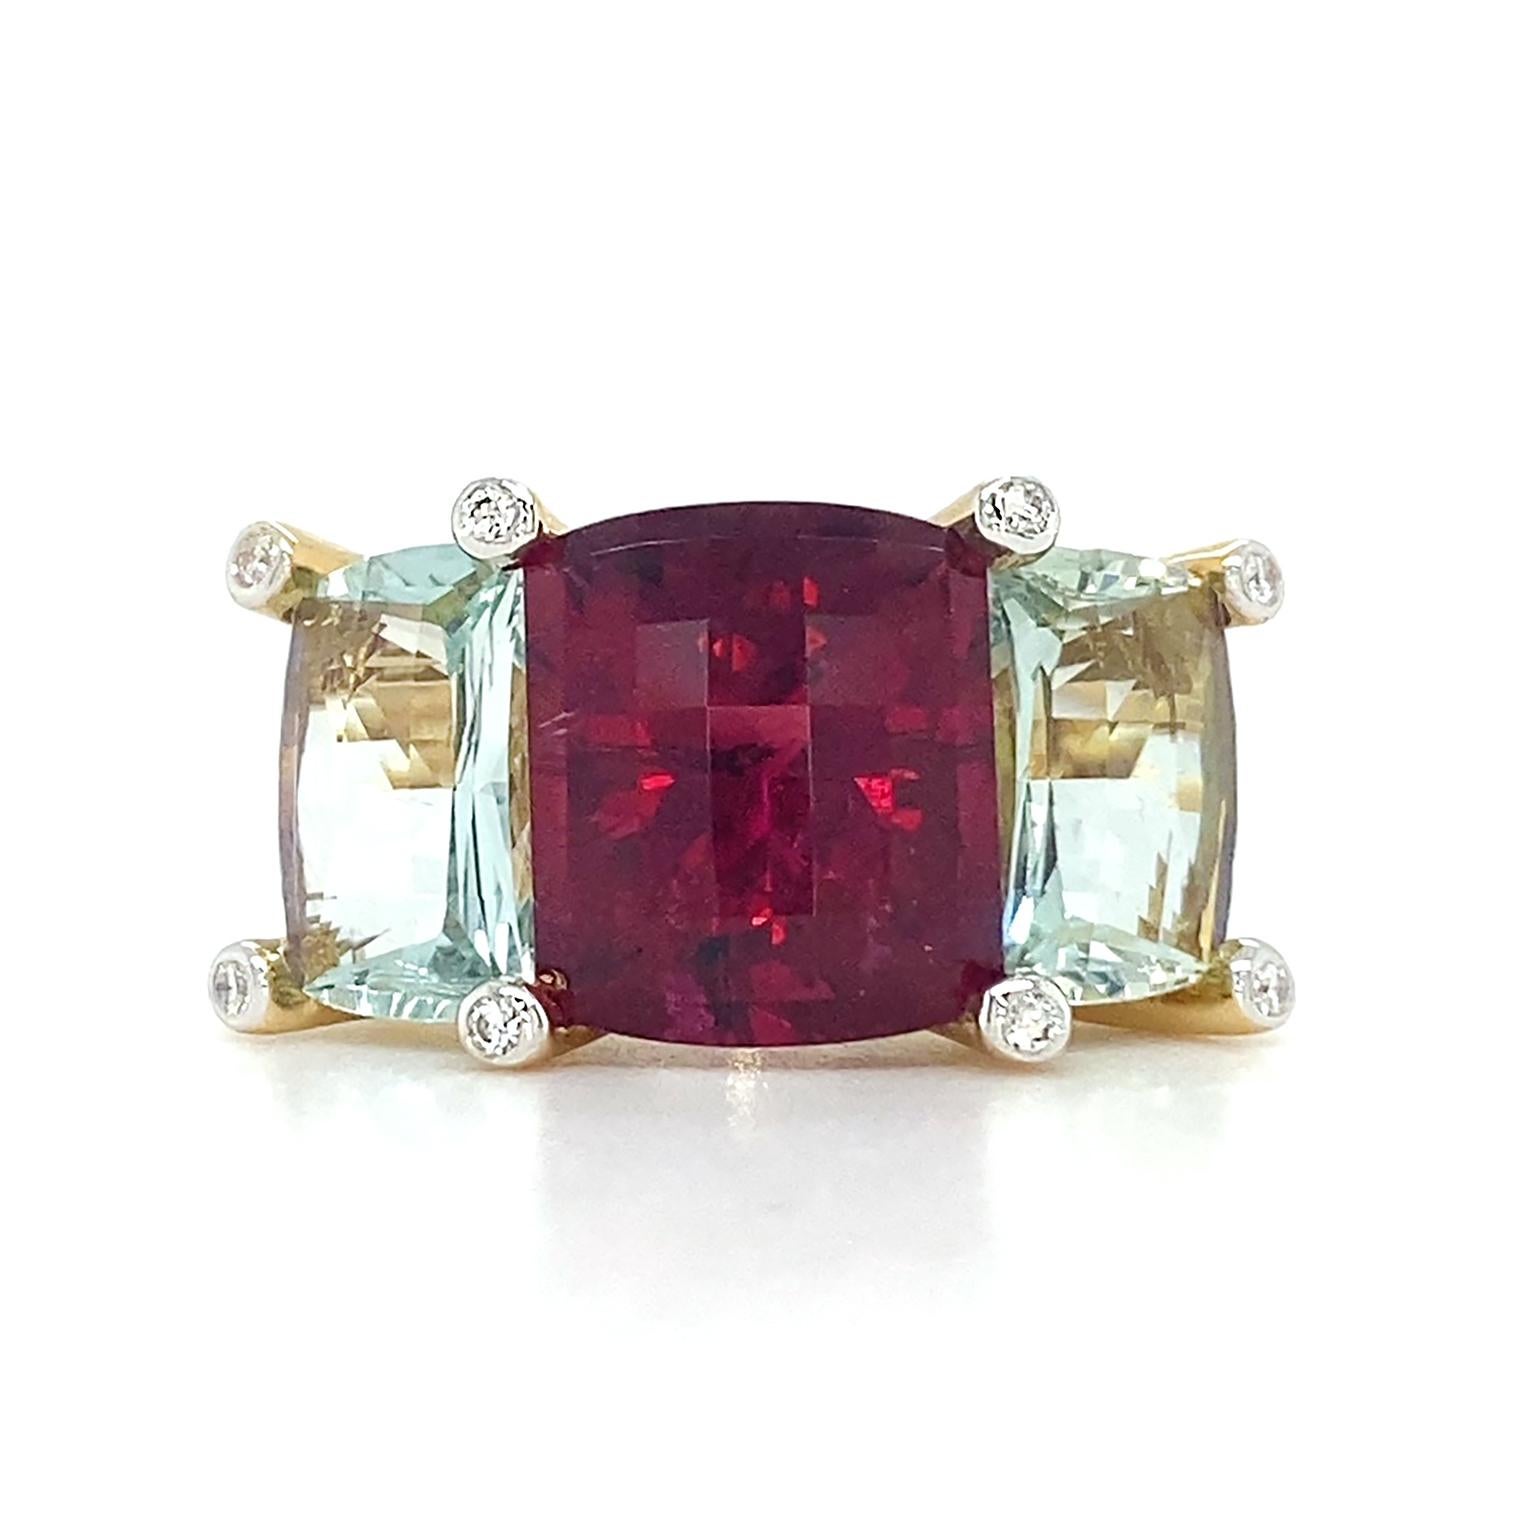 Deep hue rests at the heart of this ring. The central jewel is a dark red rubellite with a hint of purple. It’s cut into a cushion and set between four corner prongs tipped with round brilliant cut diamonds. Flanking the rubellite are pastel green